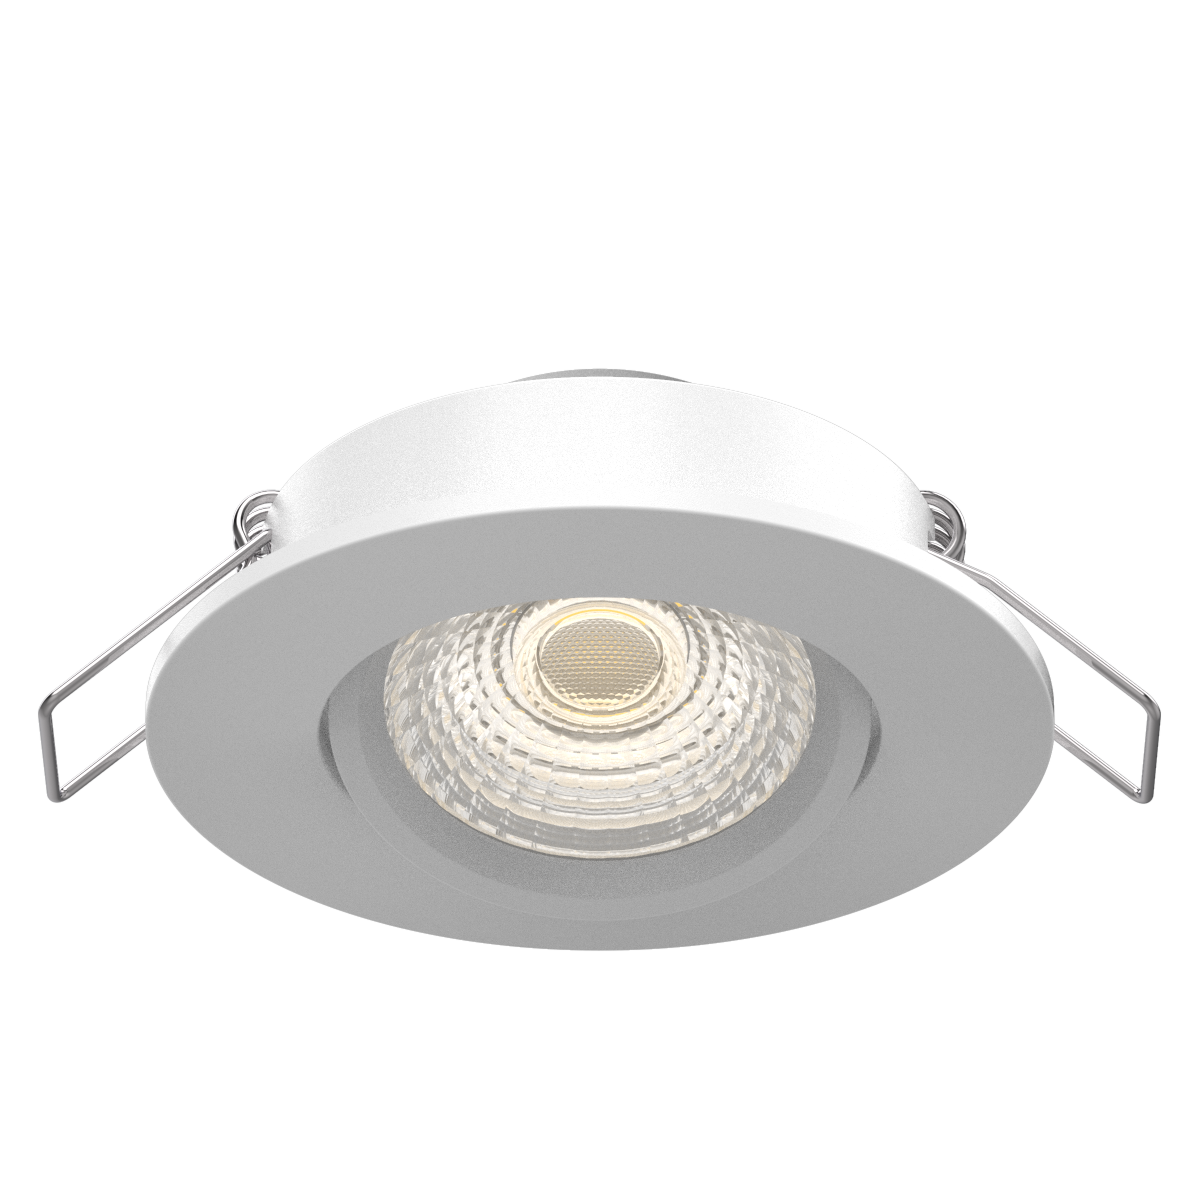 Super Purchasing for Factory Price New Design Rotatable Recessed Led Downlight - New 7W Slim Dim to warm changeable LED Downlight-Lens Version – Radiant Lighting